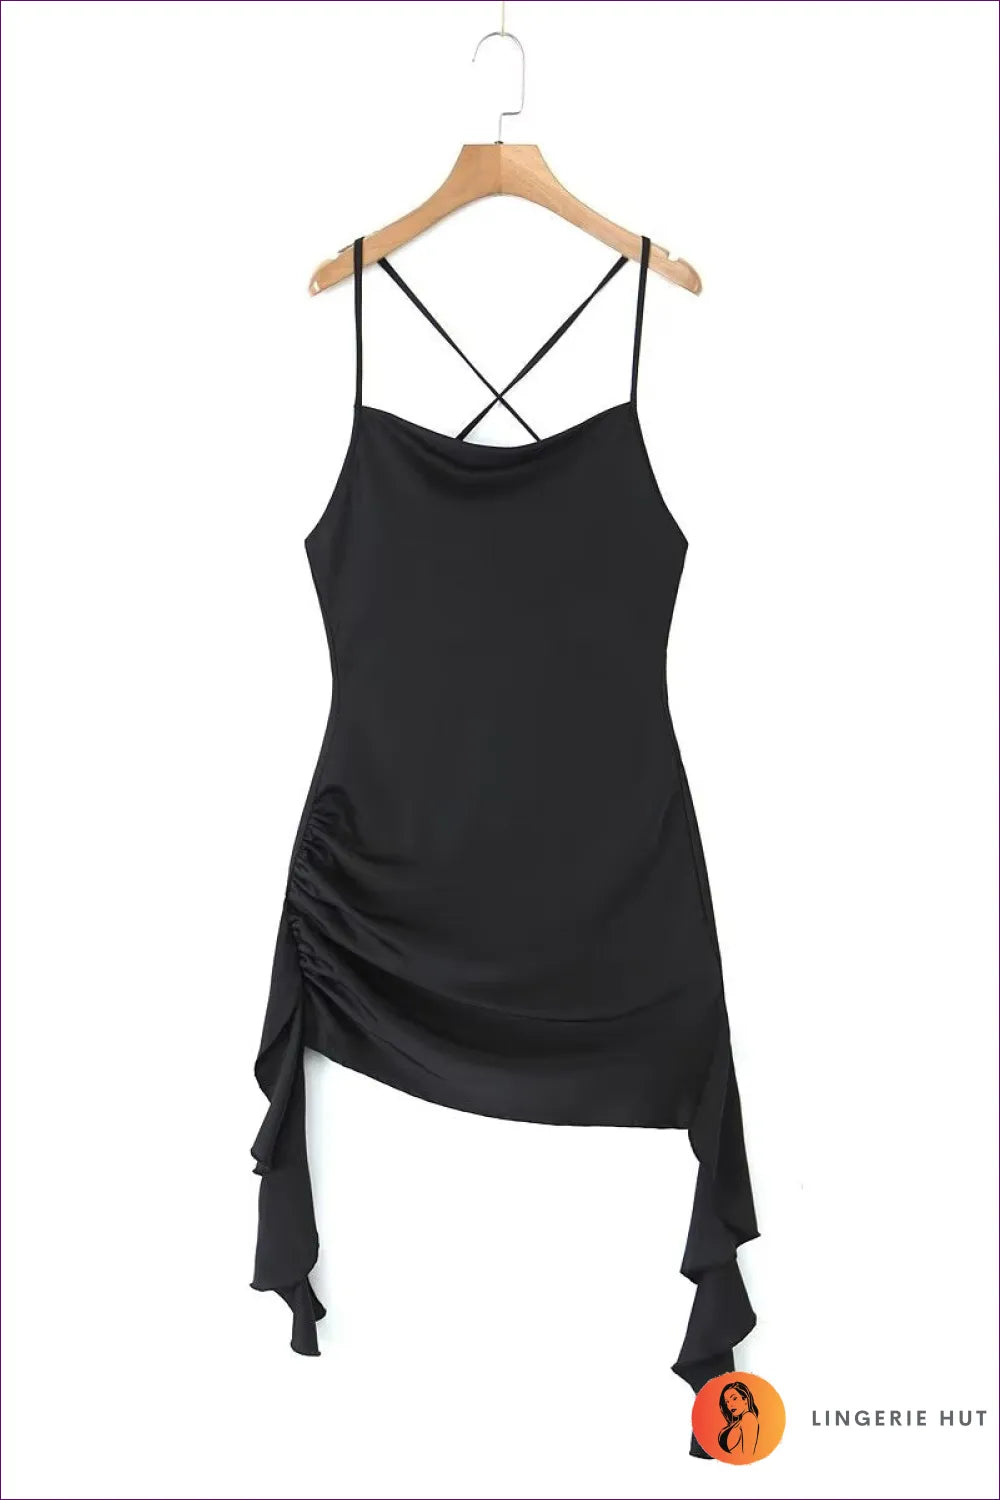 Embrace Spring In Our Sensual V-neck Dress. With a Sexy V-neck And Backless Design, It’s Alluring Elegance At